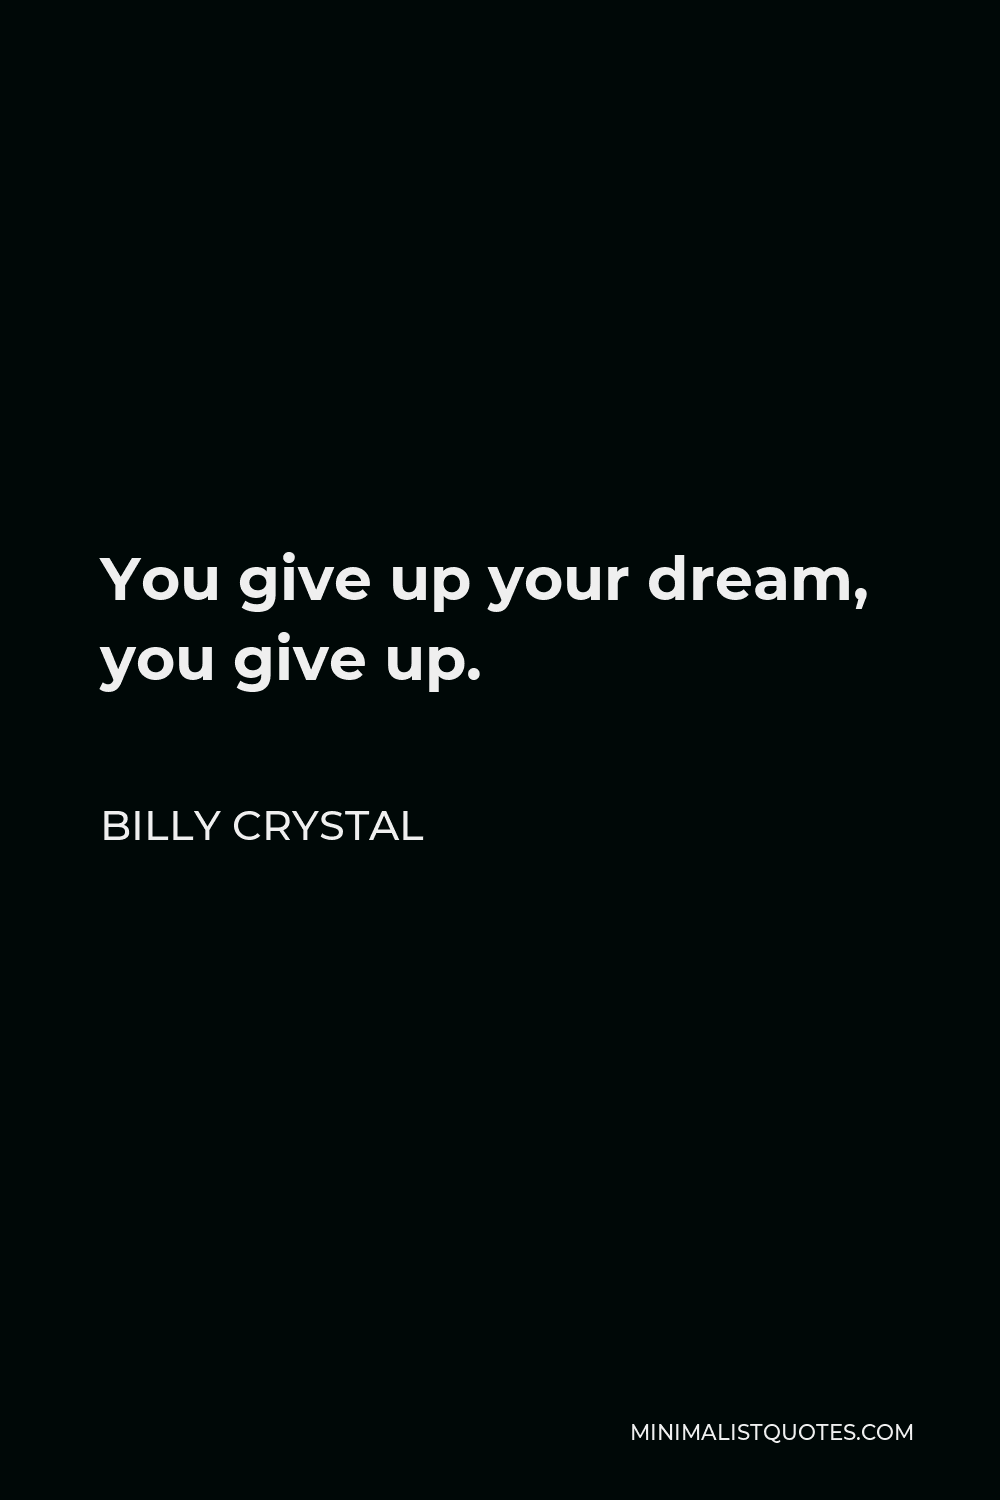 Billy Crystal Quote - You give up your dream, you give up.